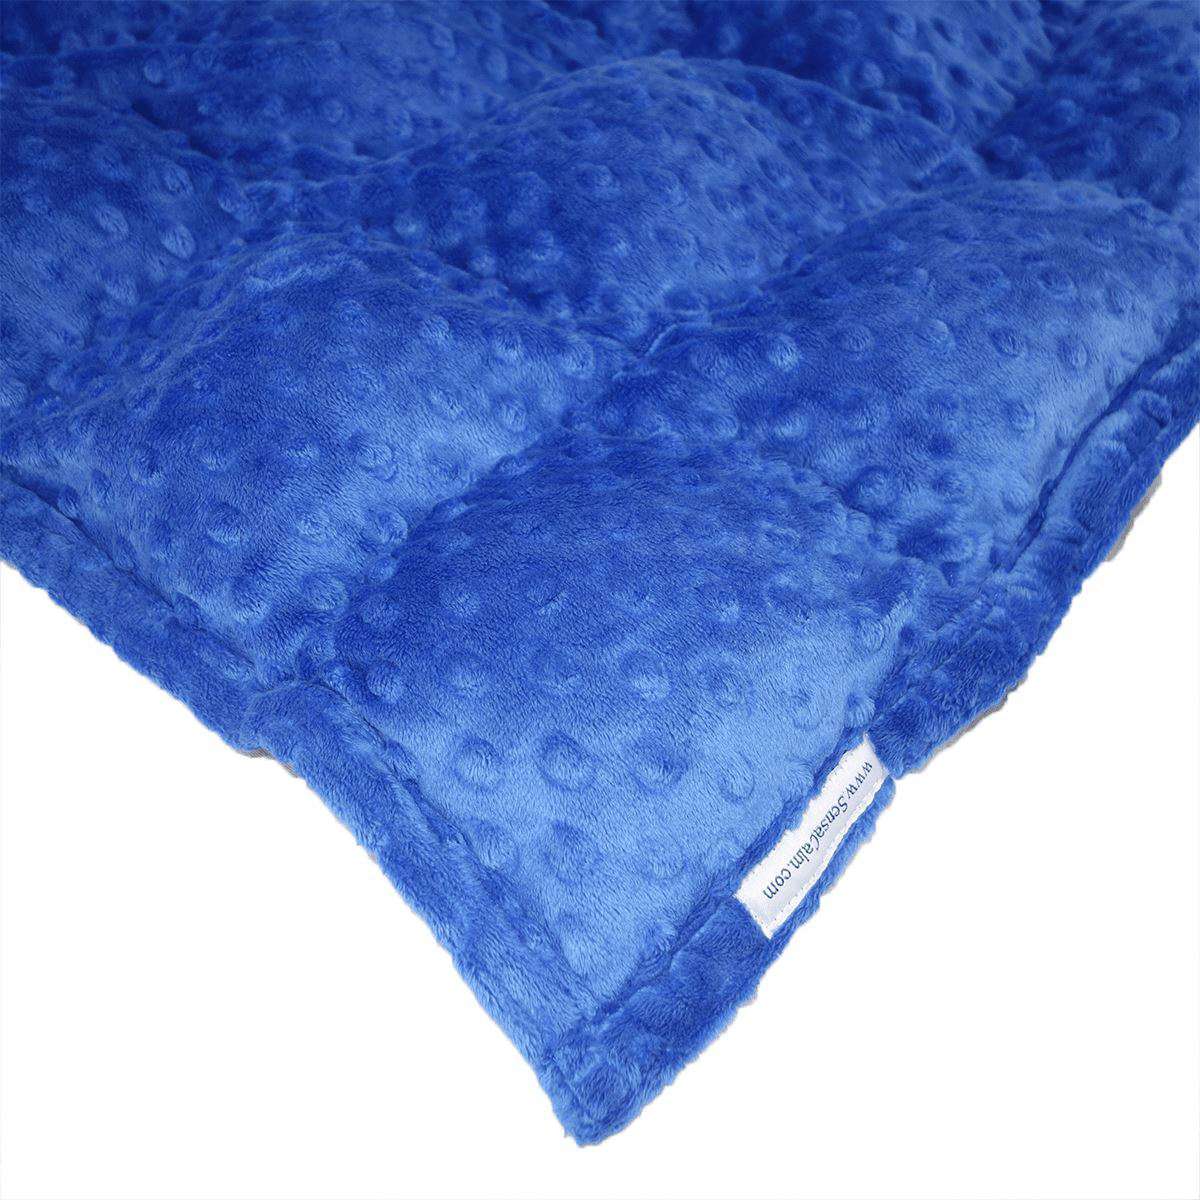 Dimple Cuddle Weighted Blanket -  Electric Blue